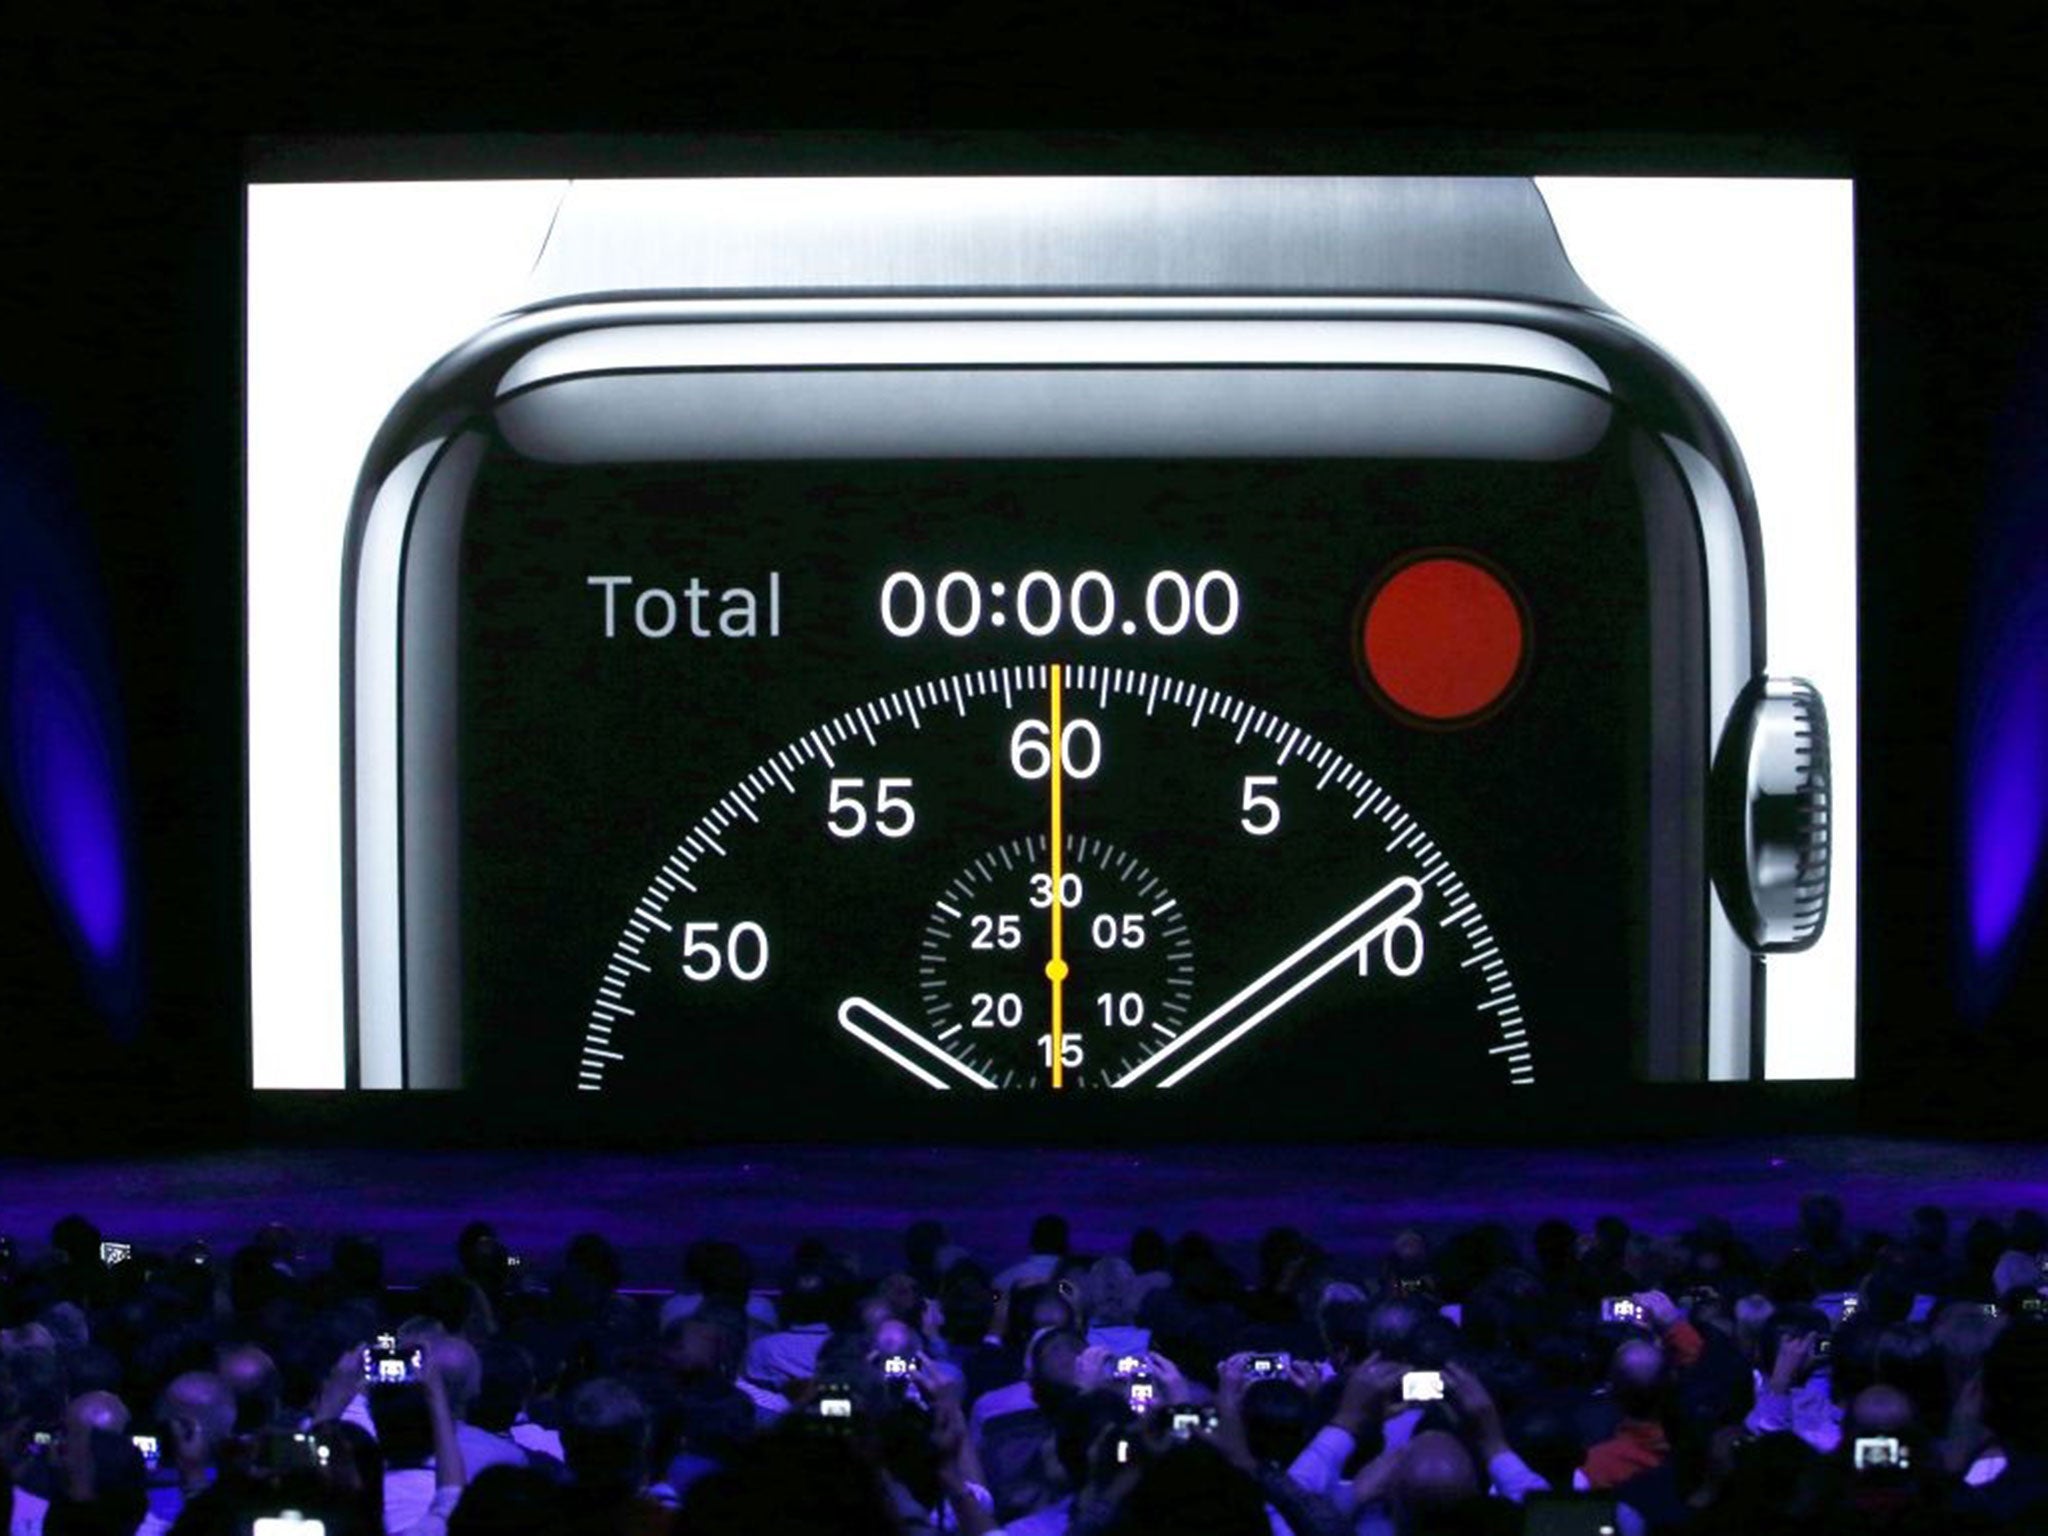 The crowd use their devices to capture the Apple Watch  